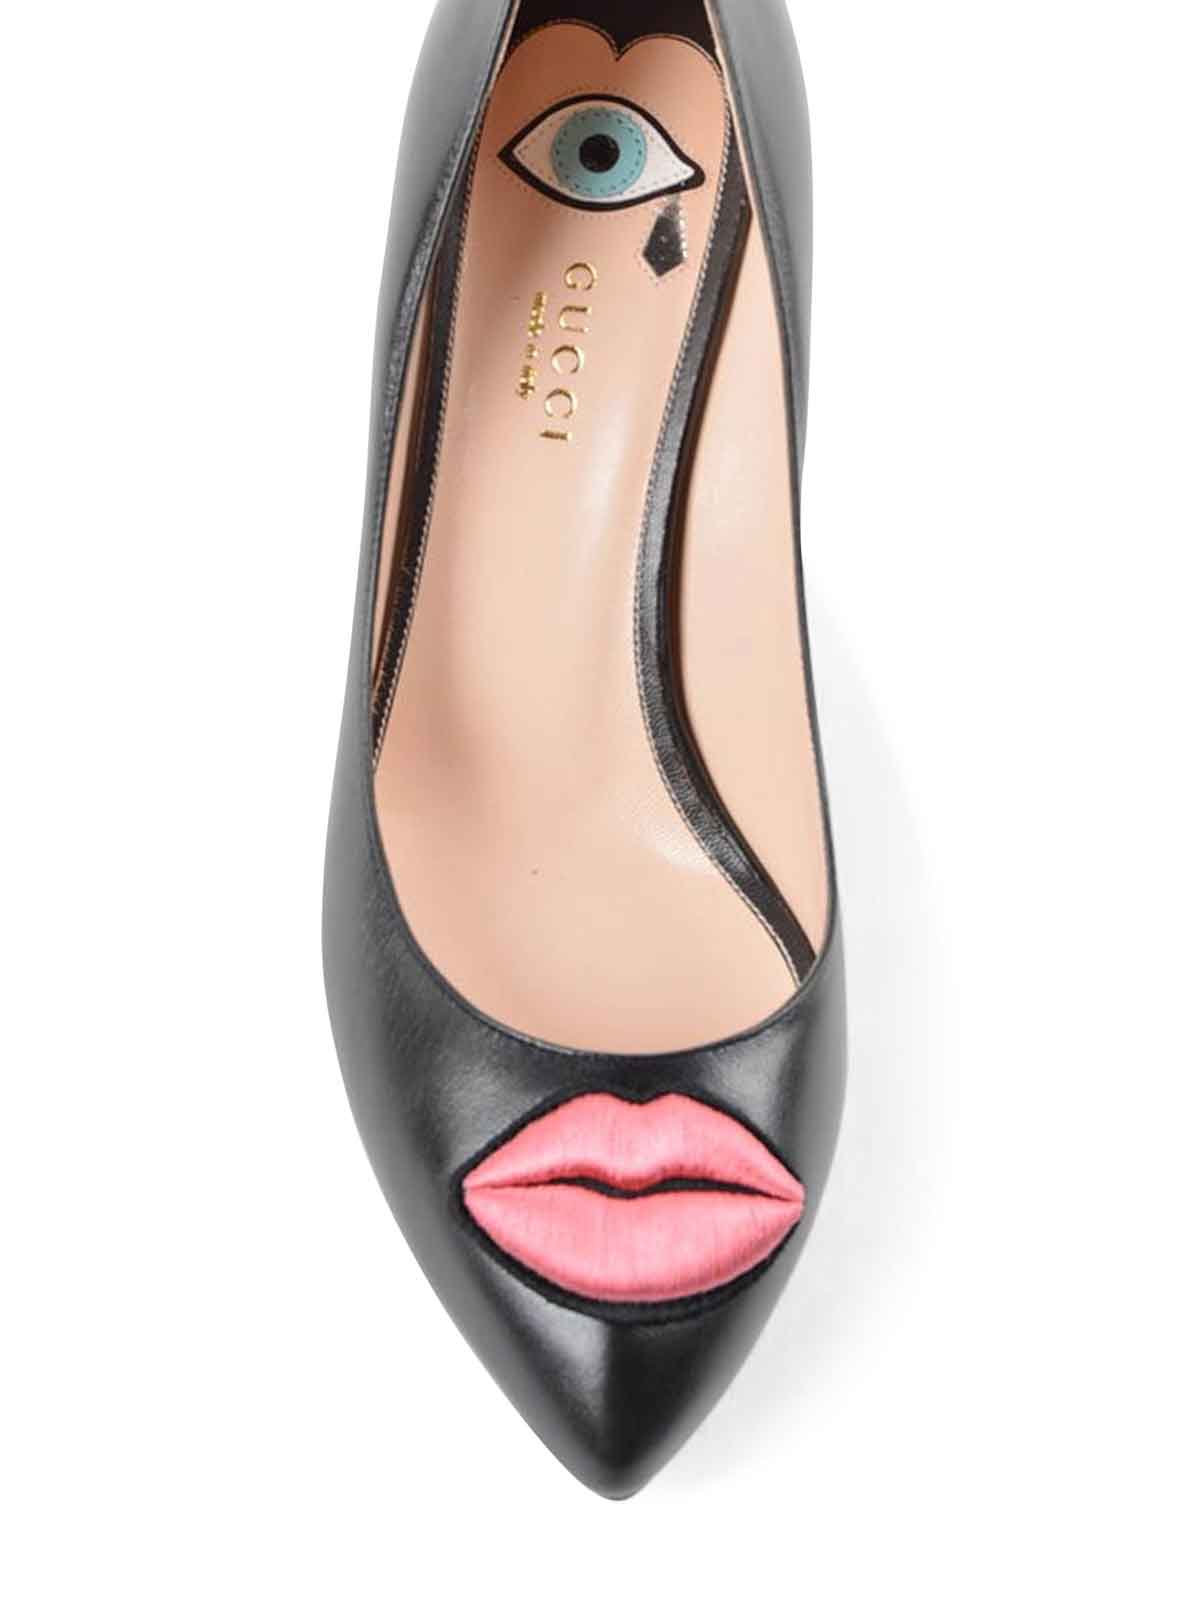 gucci shoes with kiss